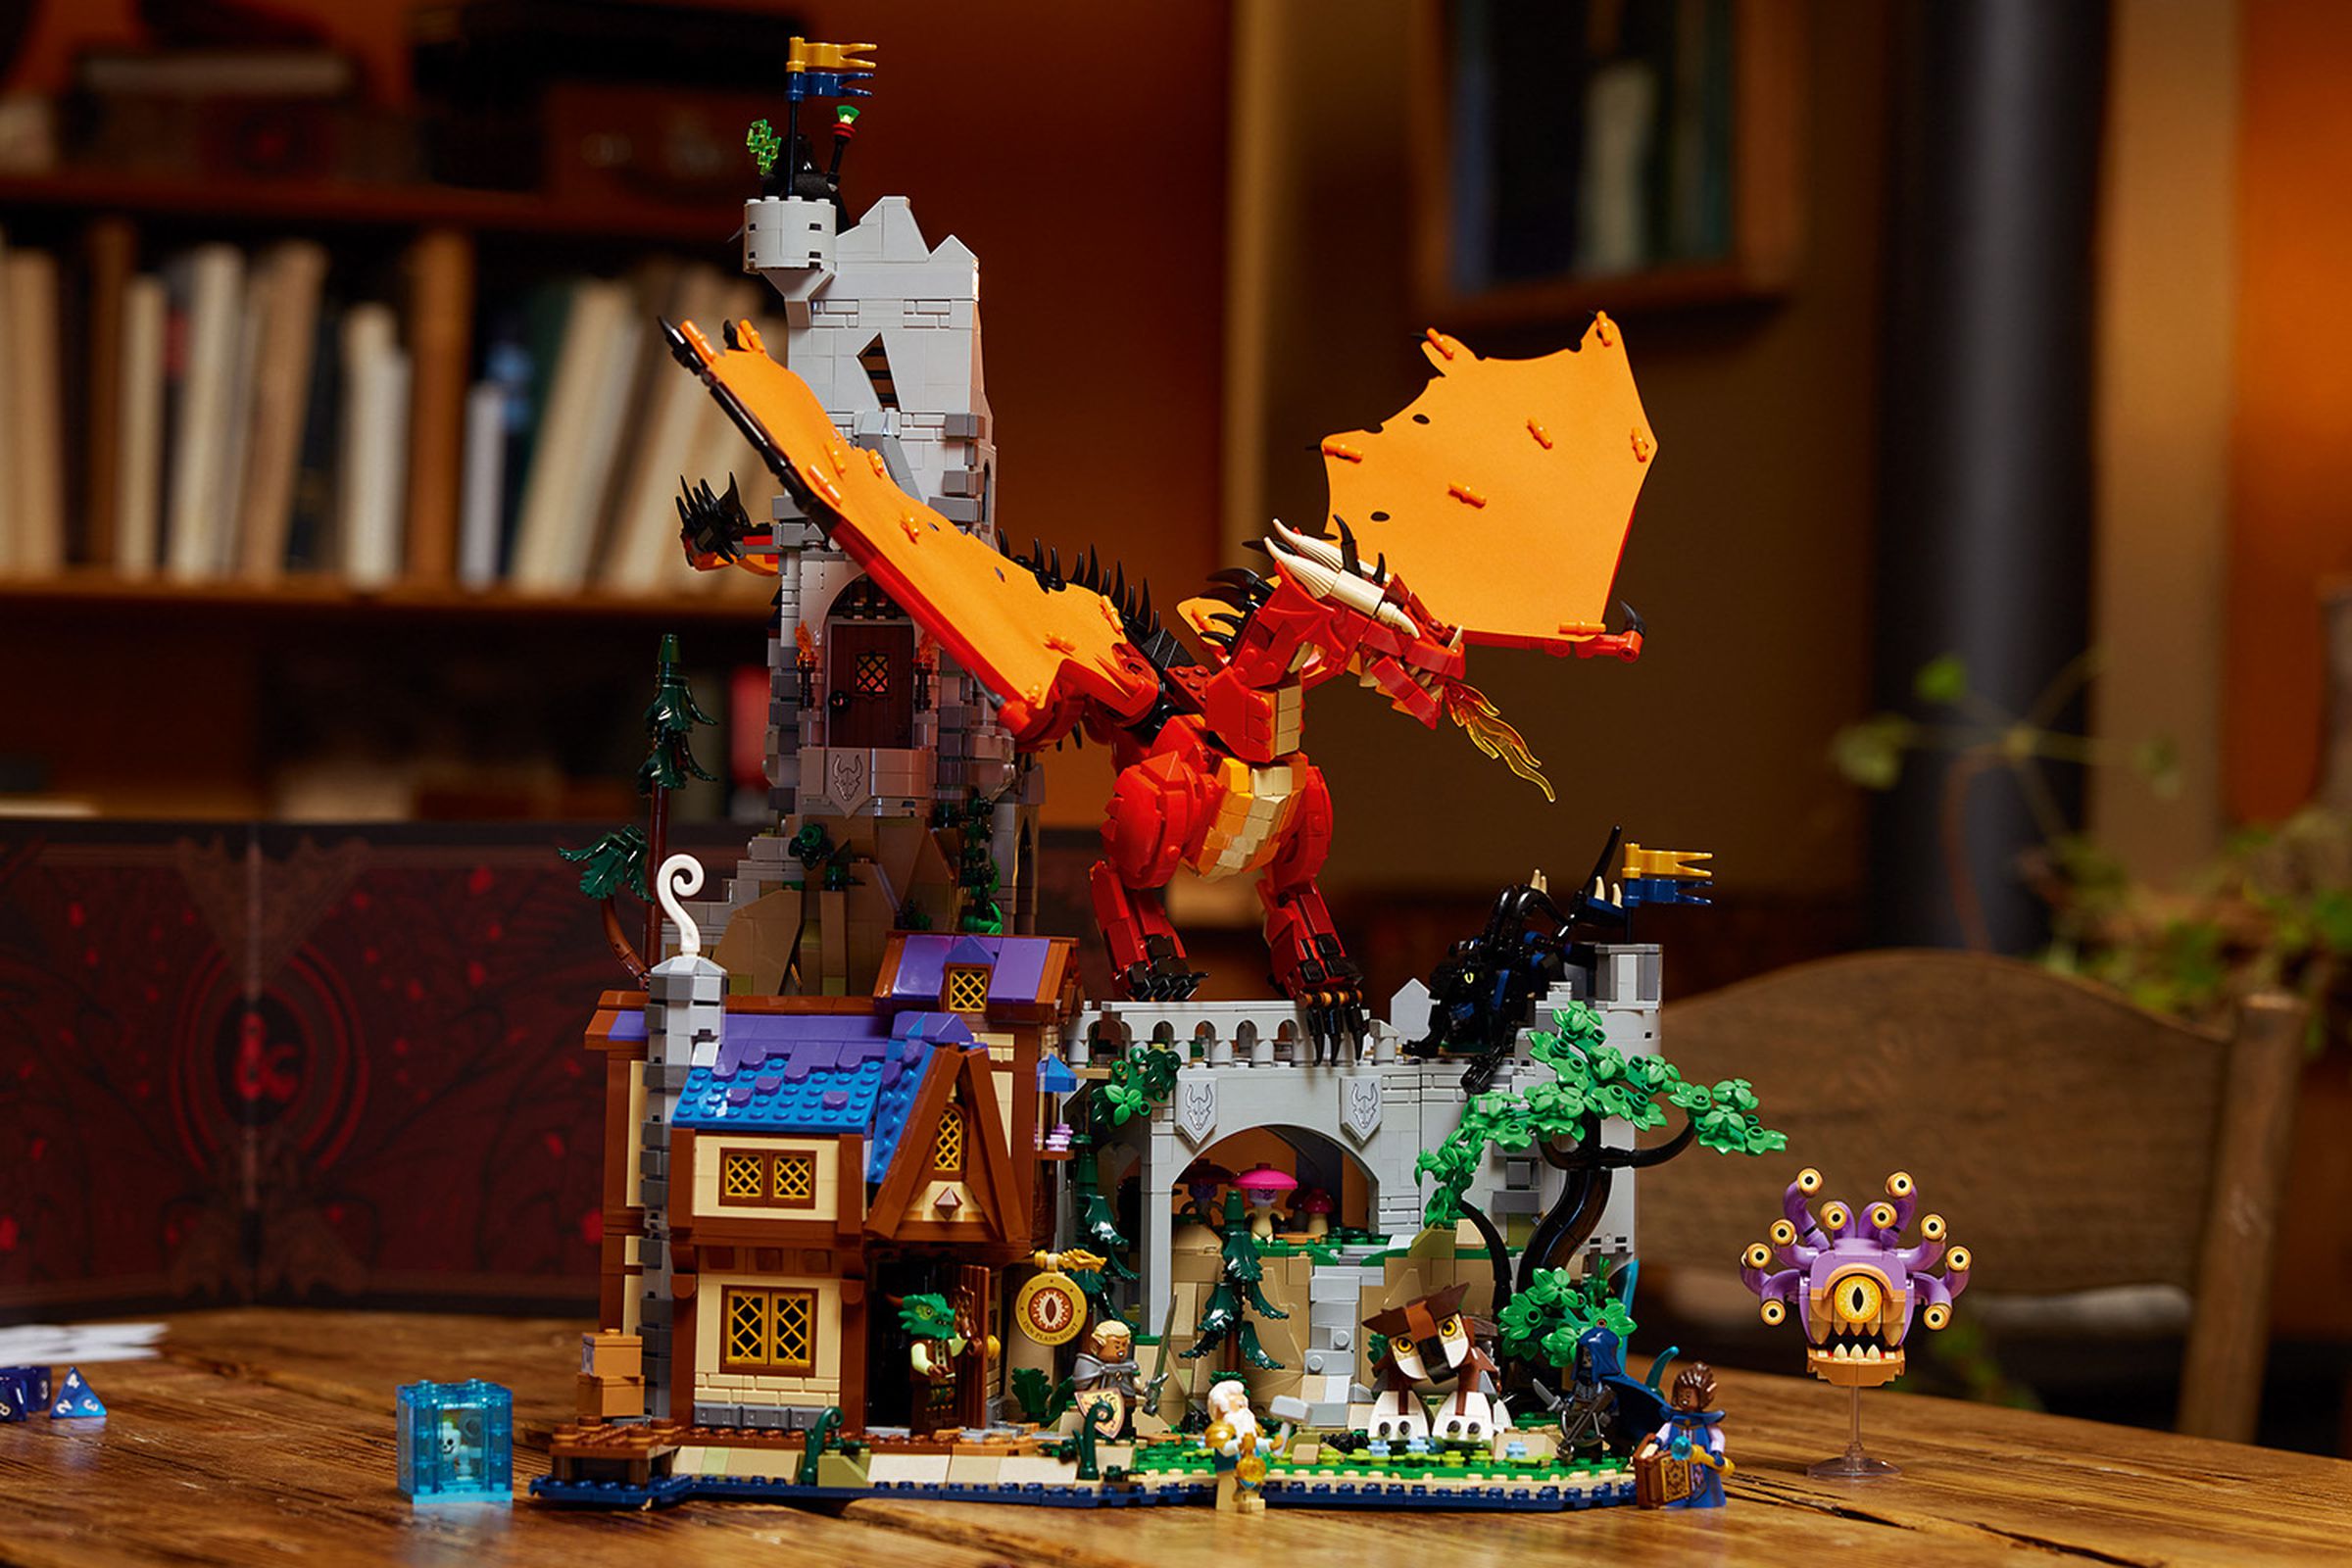 The Lego D&amp;D Red Dragons tale set.